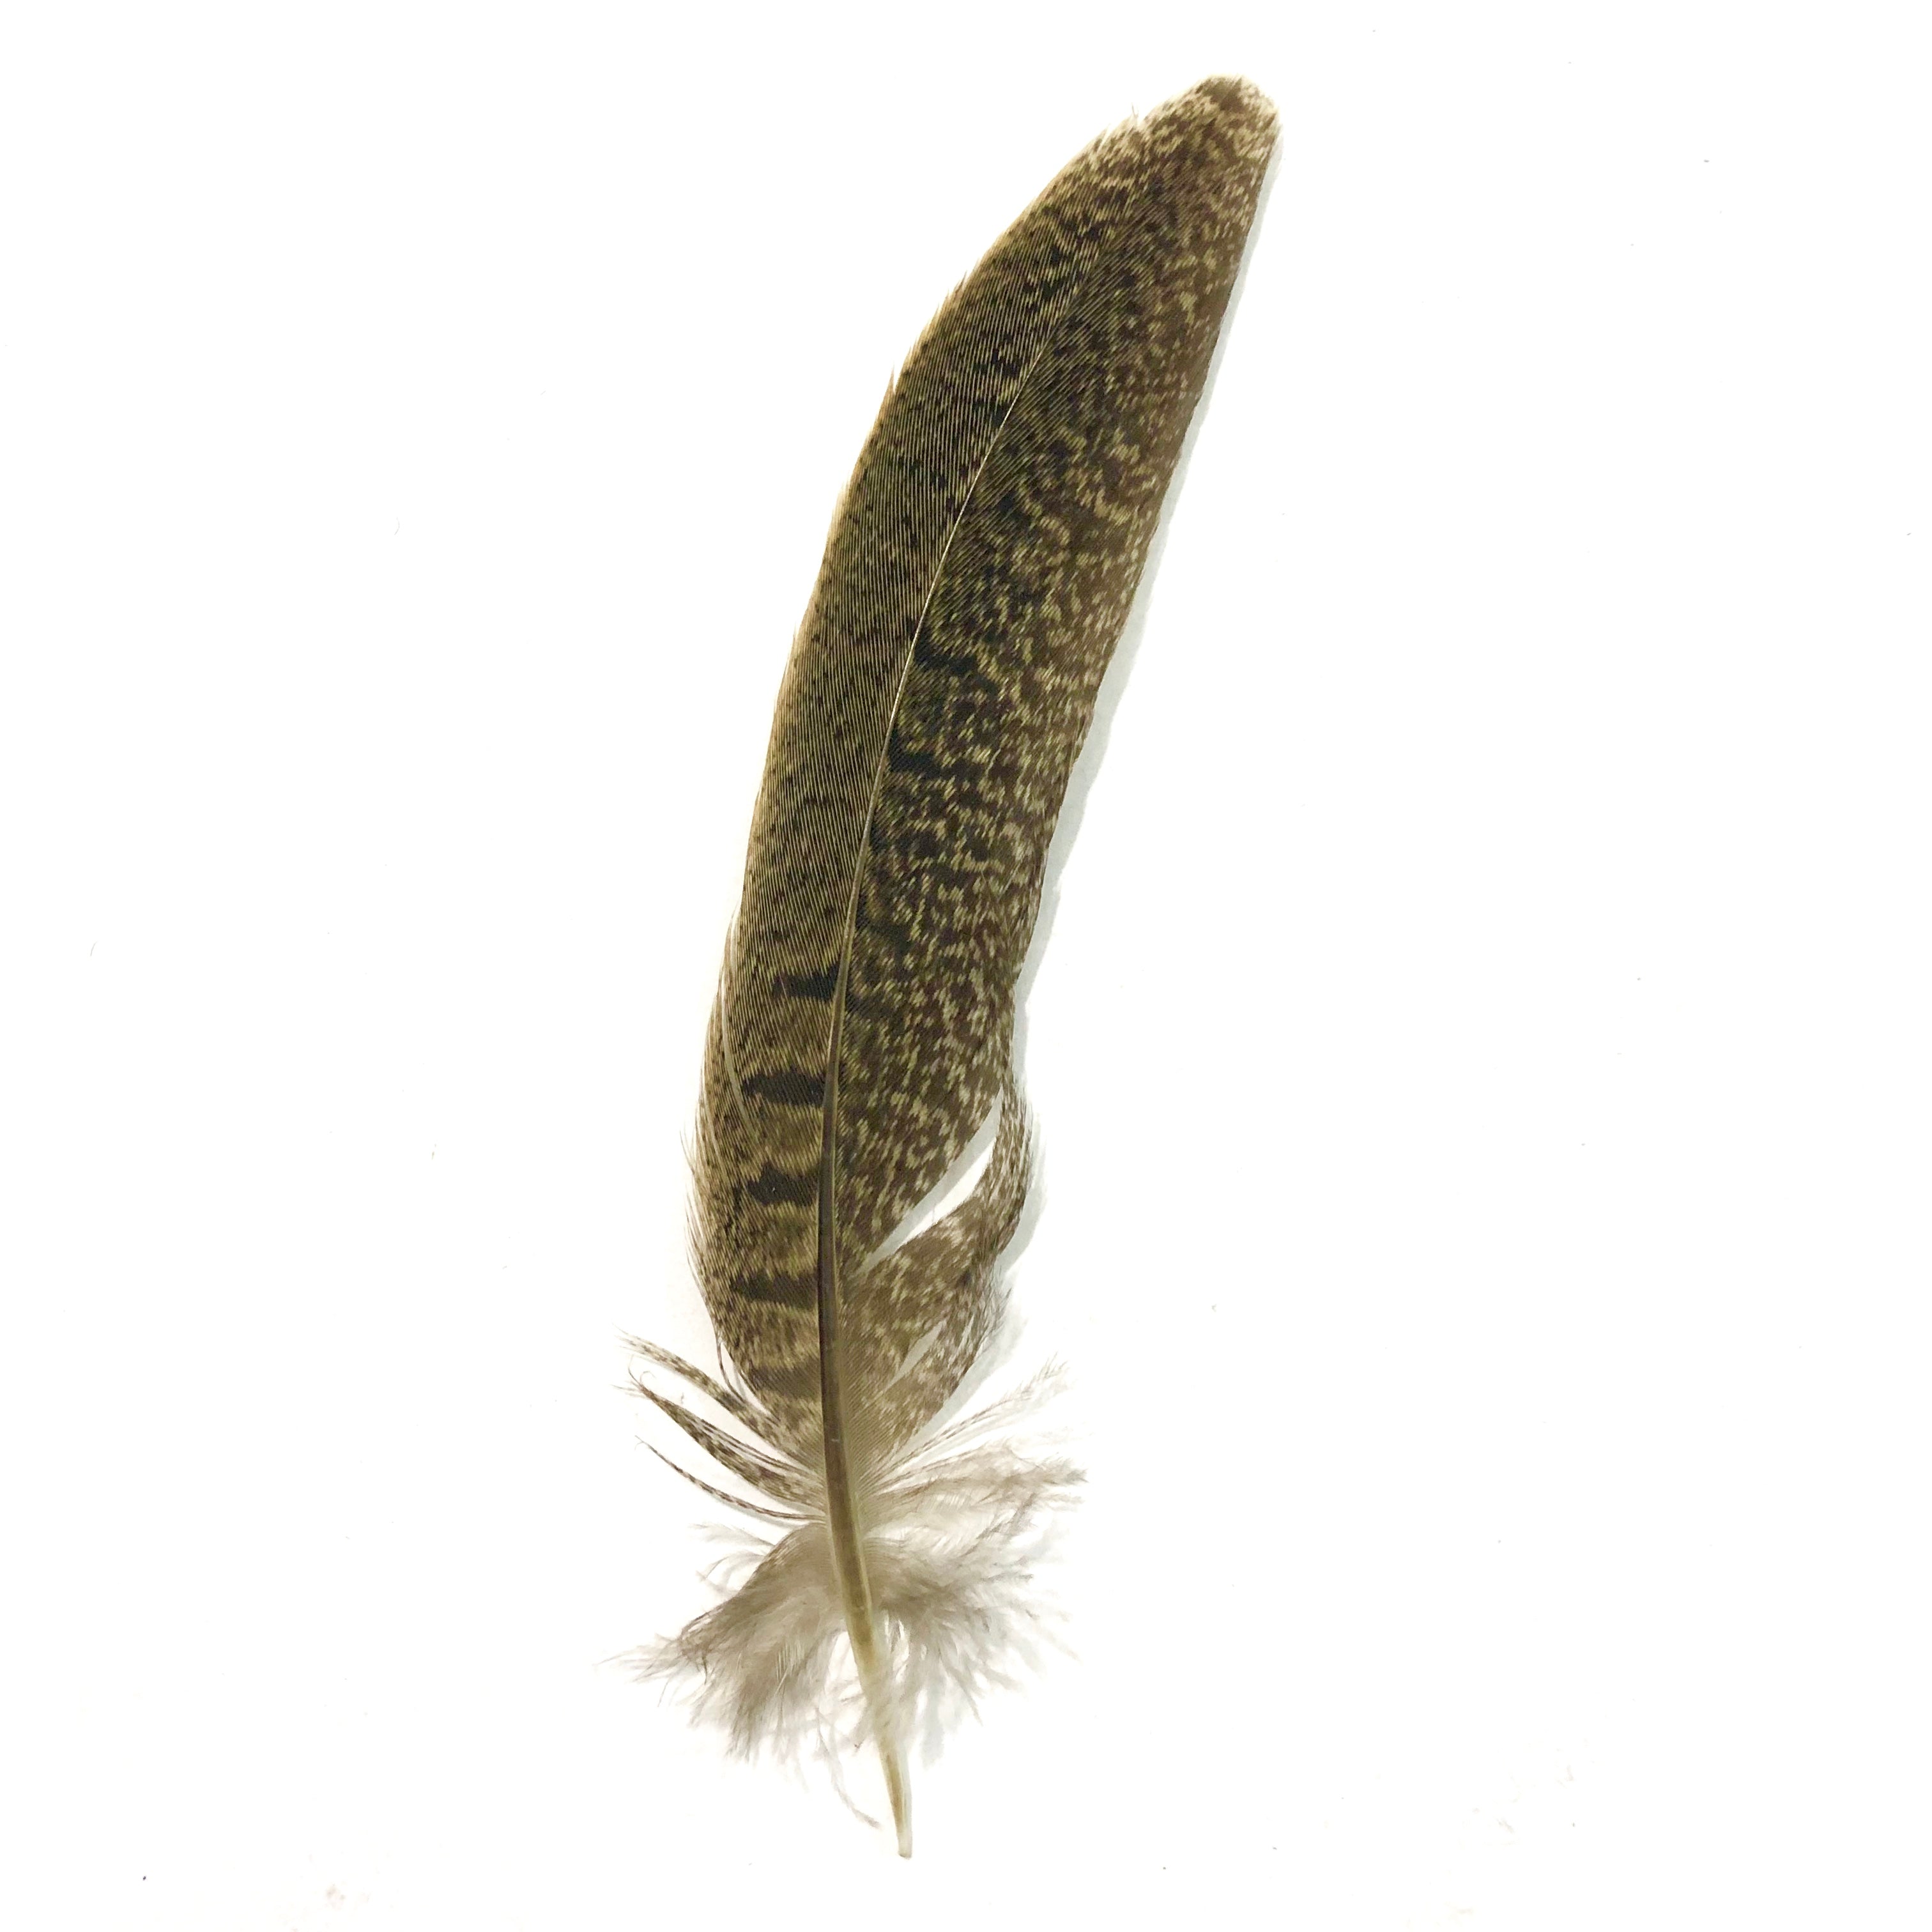 Under 6" Ringneck Pheasant Tail Feather x 10 pcs - Natural